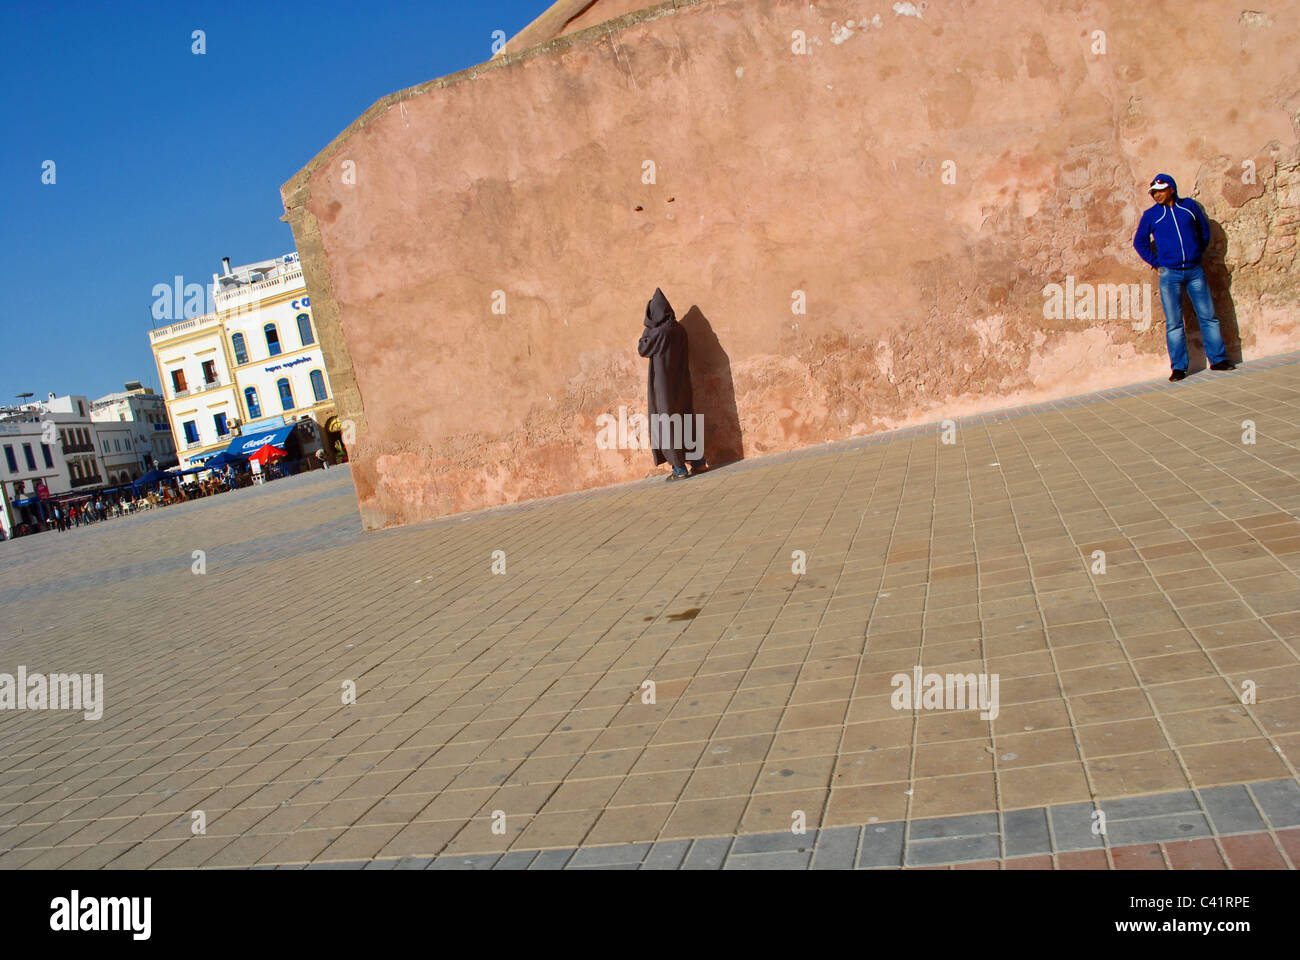 People stand against a wall in the main square in Essaouira, Morocco Stock Photo